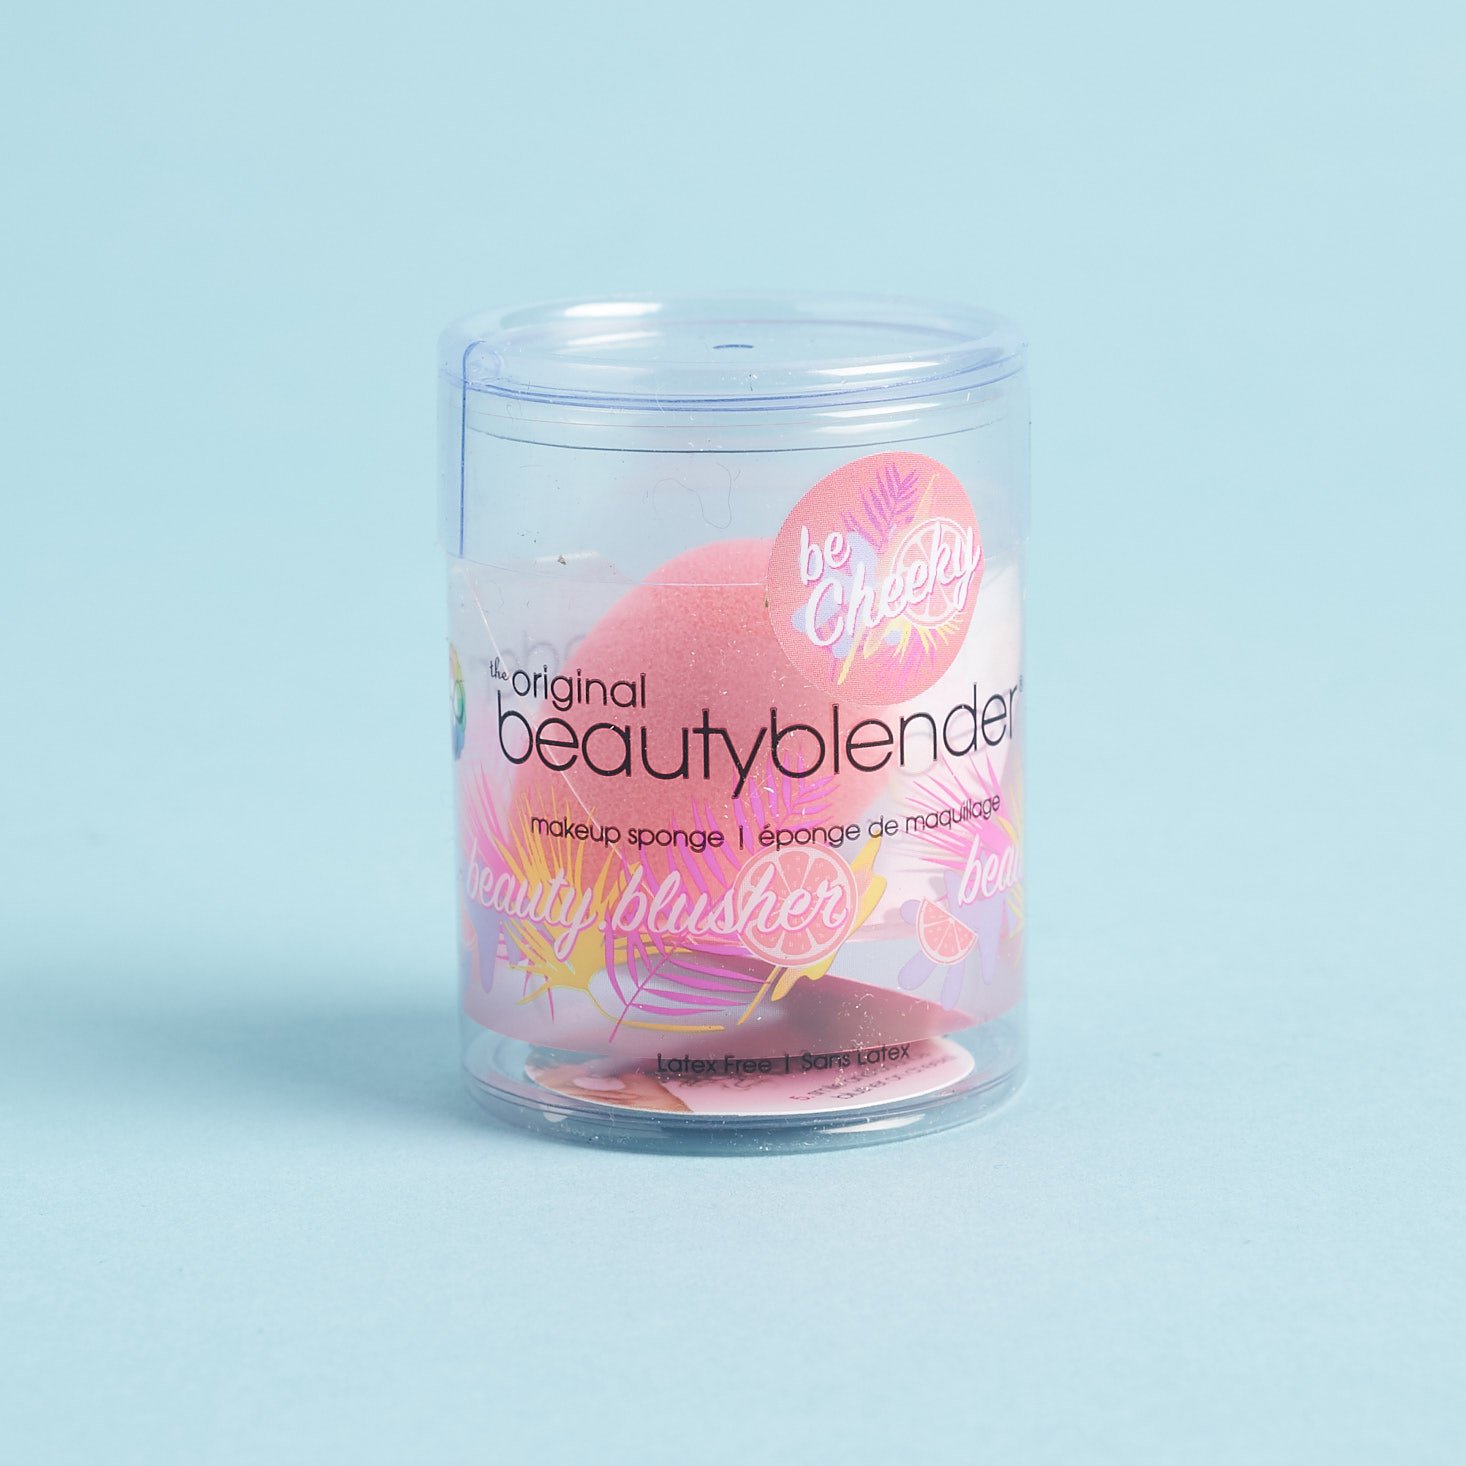 Birchbox Curated #2 May 2019 beauty box review beauty blender